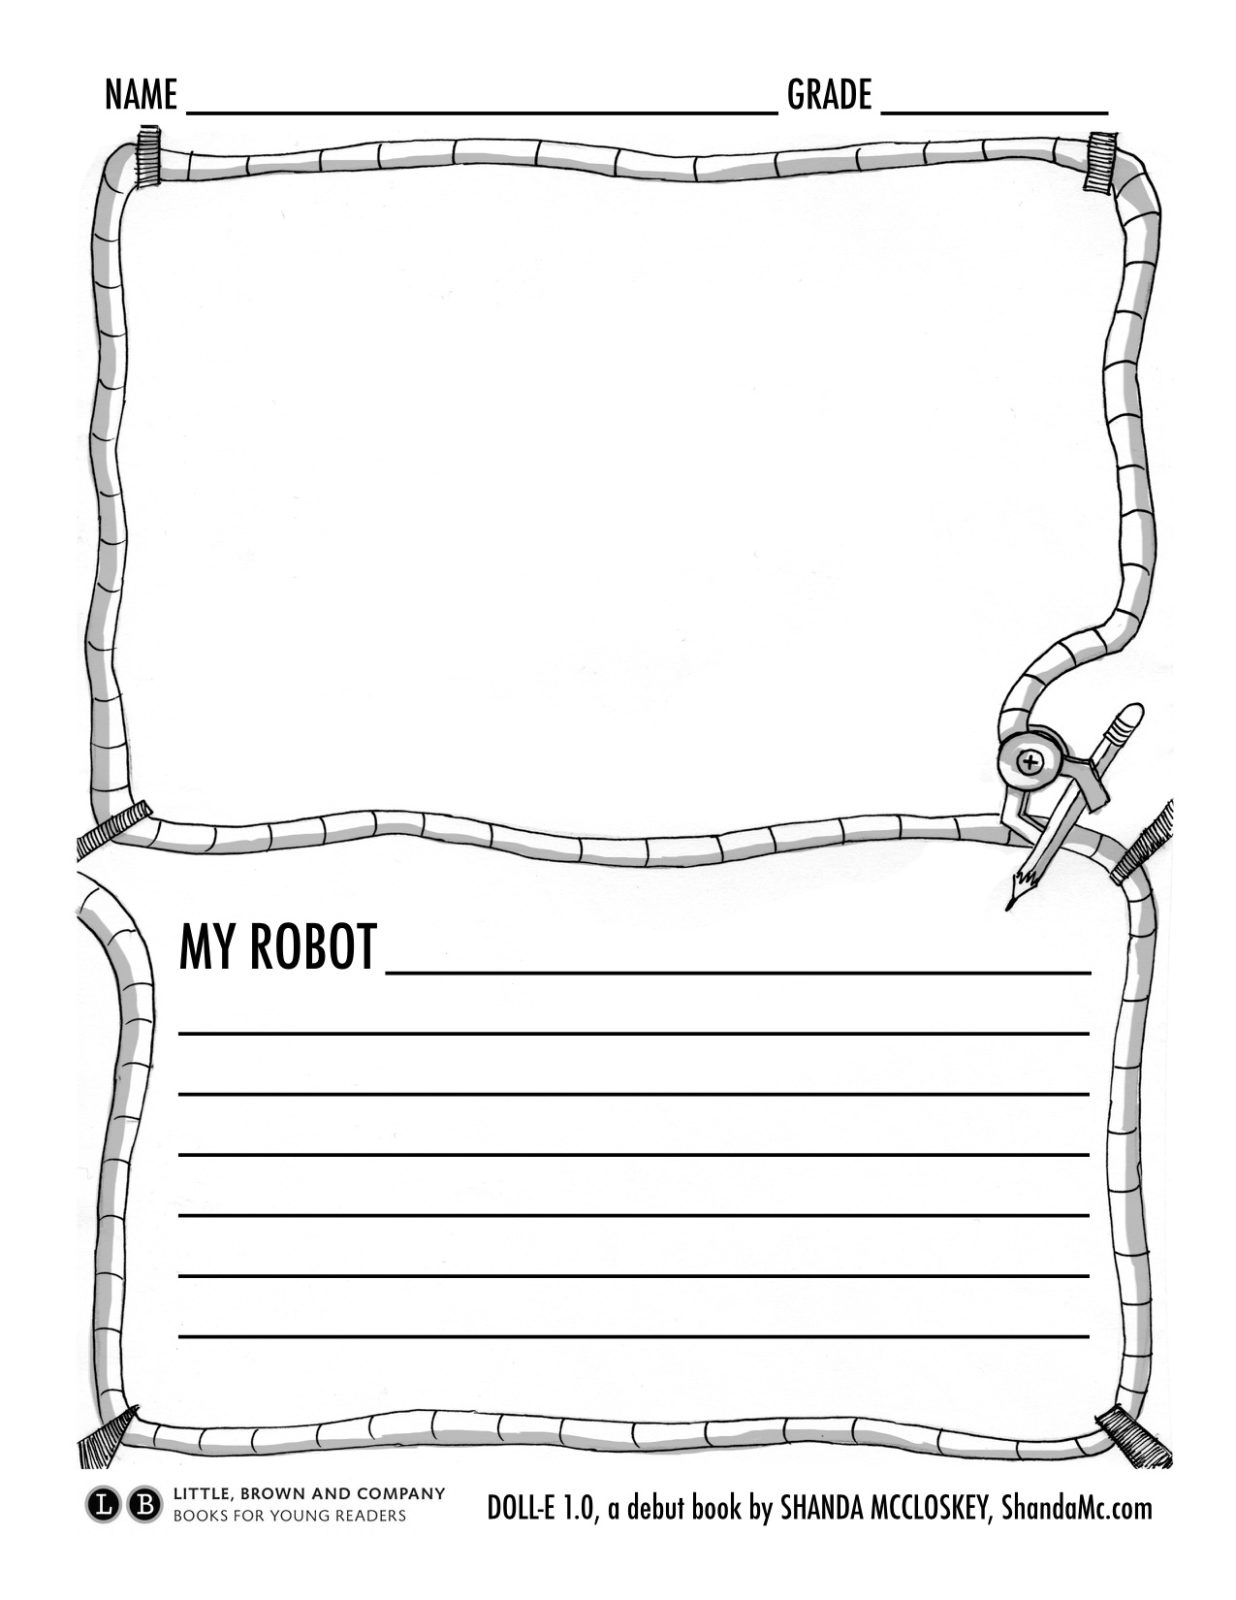 My robot drawing and writing activity